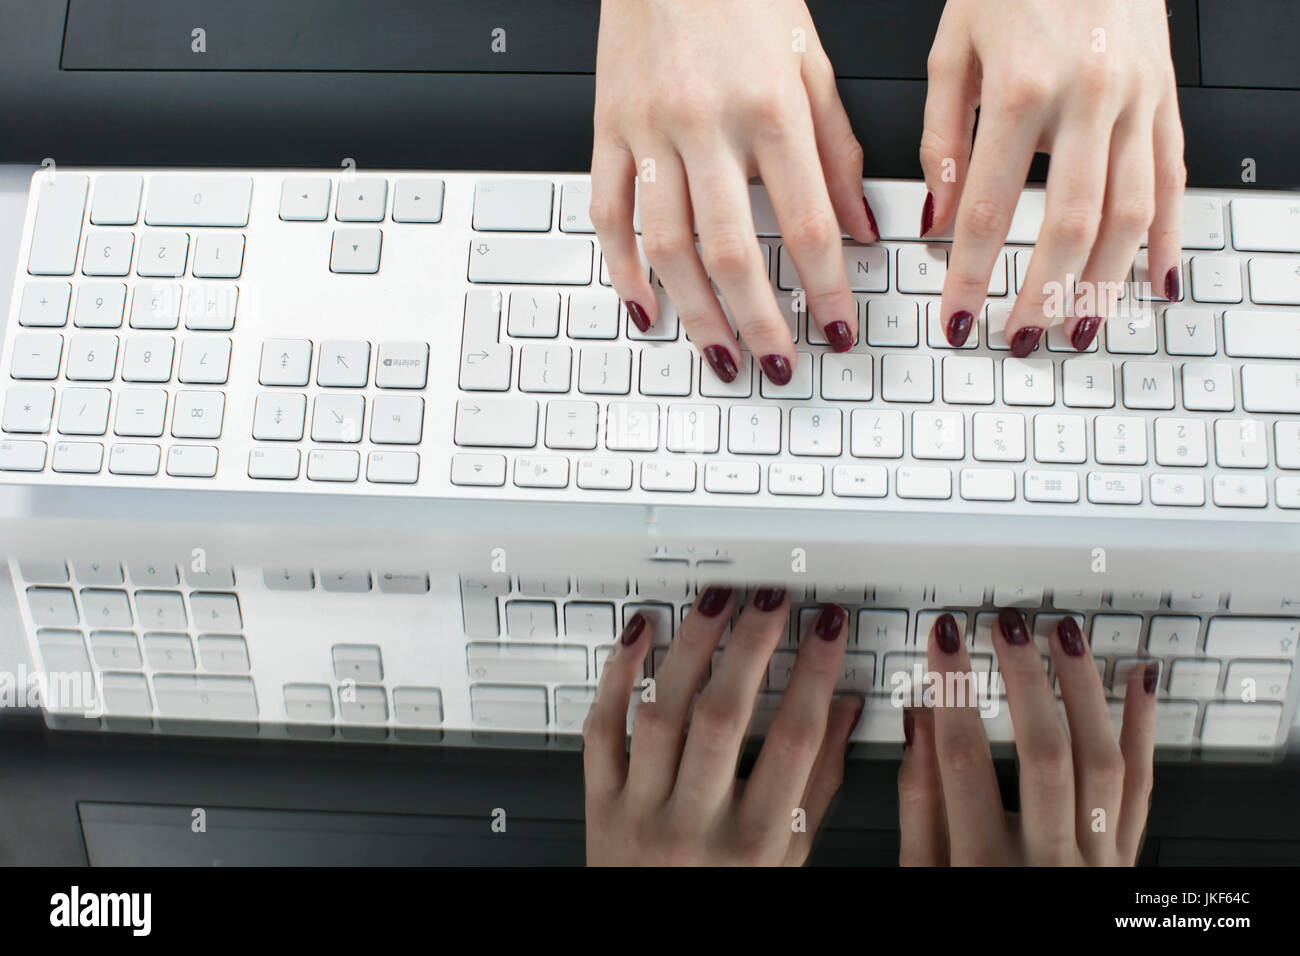 Female hands typing on a keyboard Stock Photo